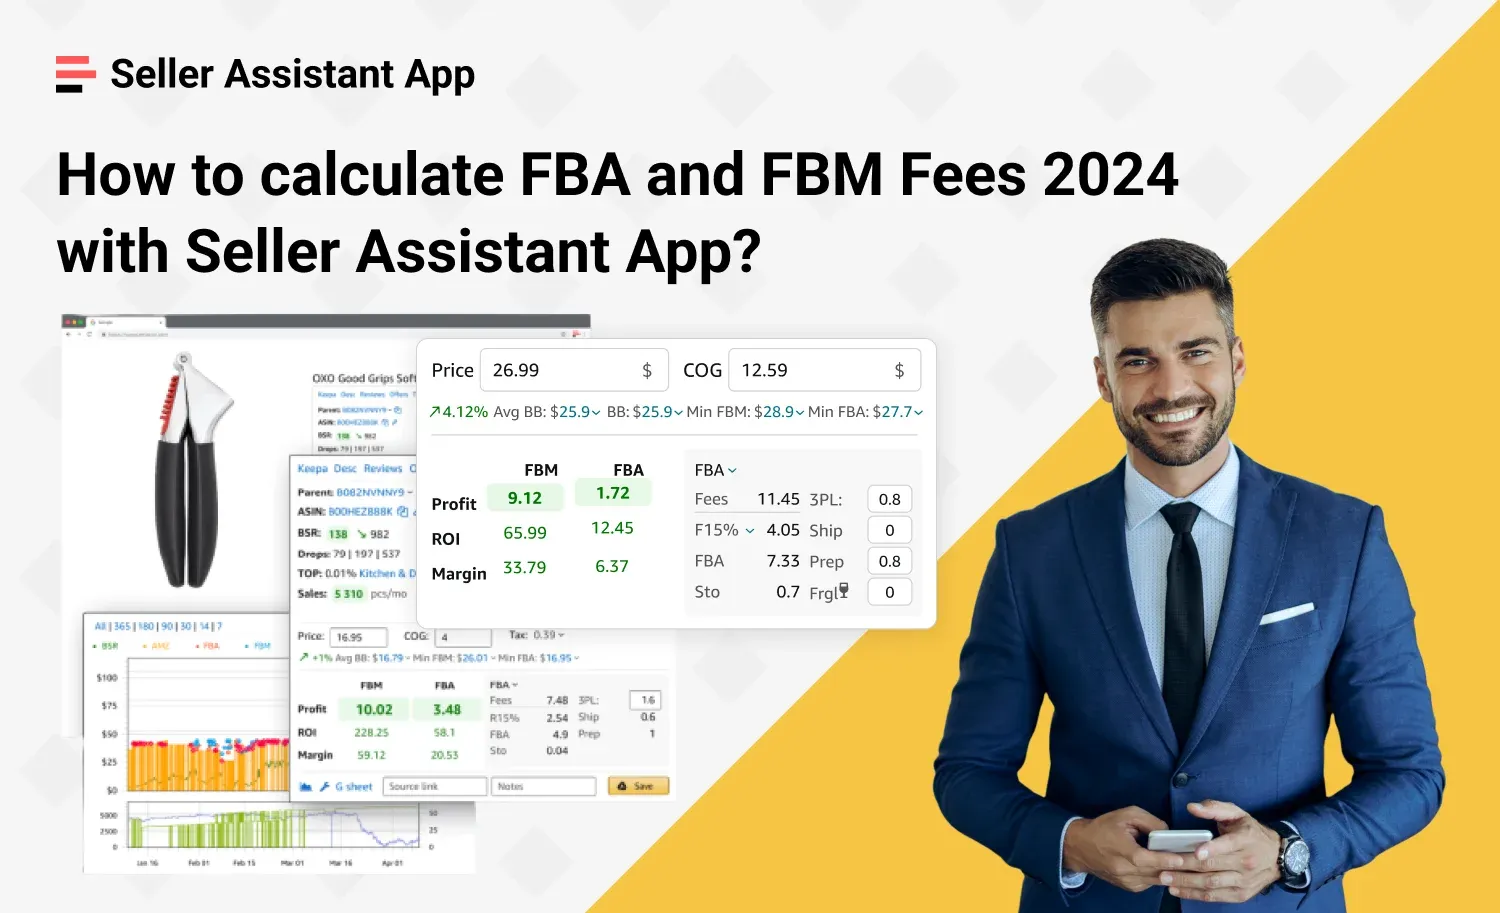 How to Calculate FBA and FBM Fees in 2024 with Seller Assistant